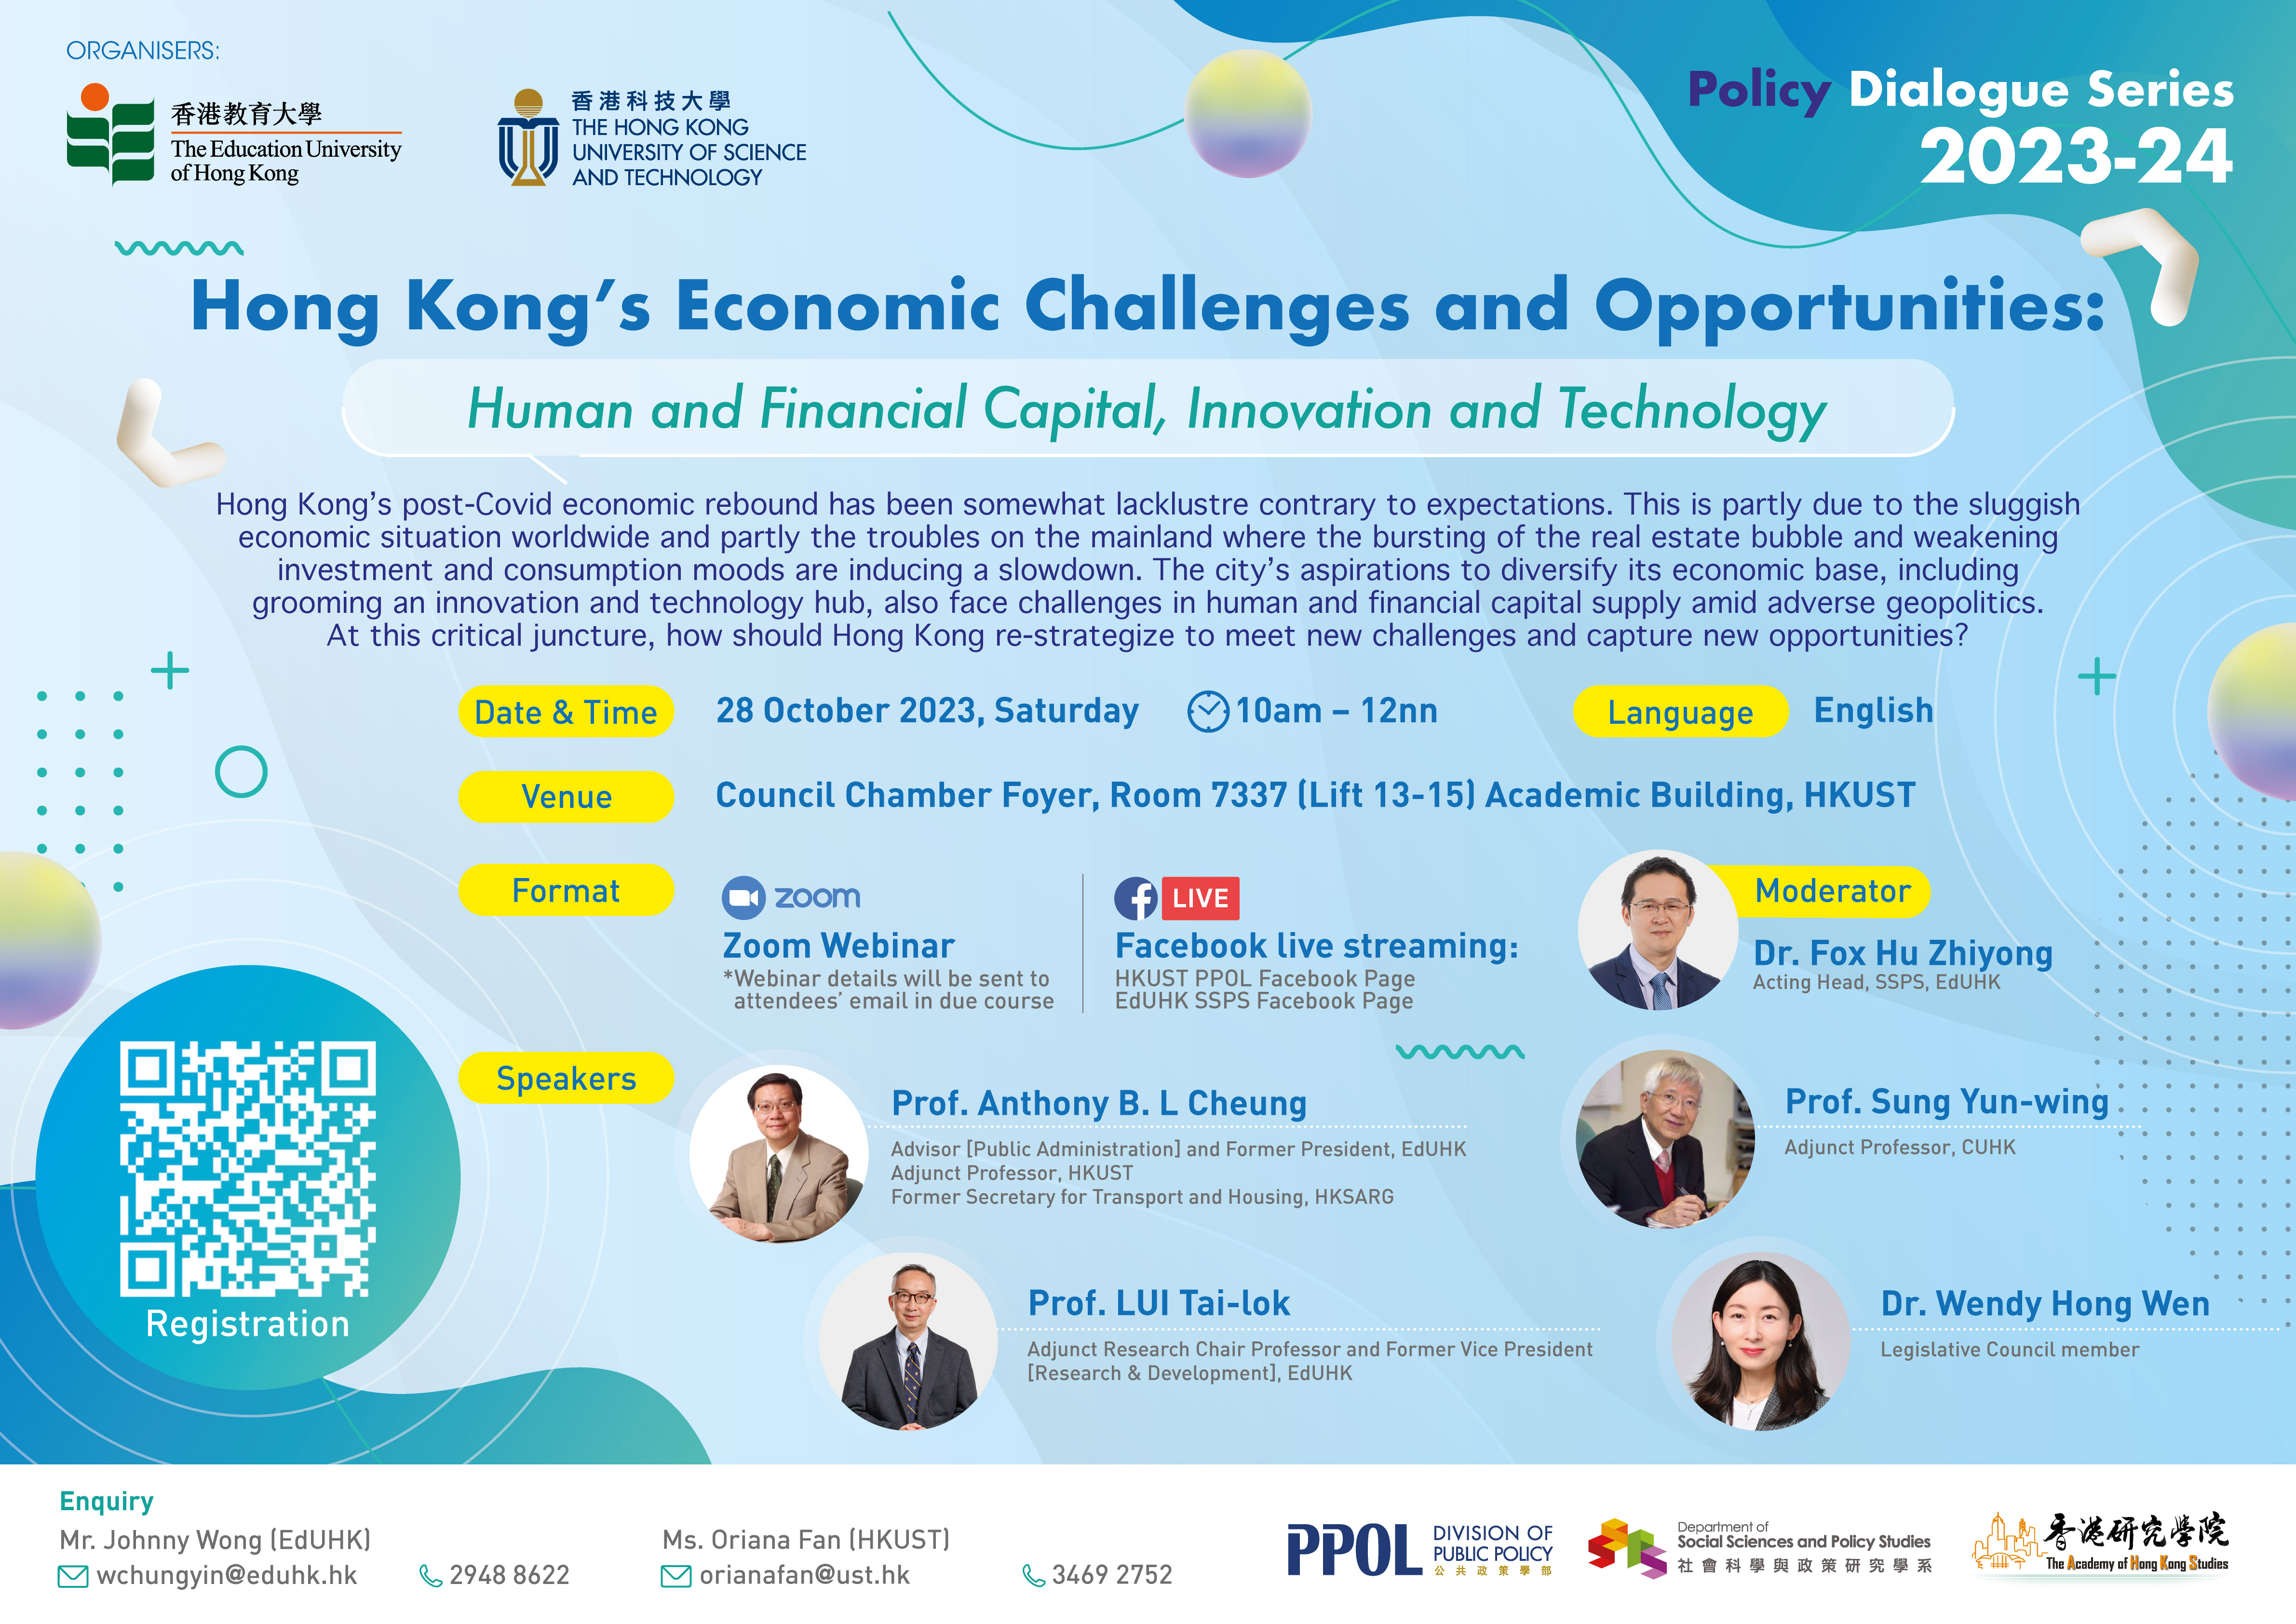 Hong Kong's Economic Challenges and Opportunities: Human and Financial Capital, Innovation and Technology